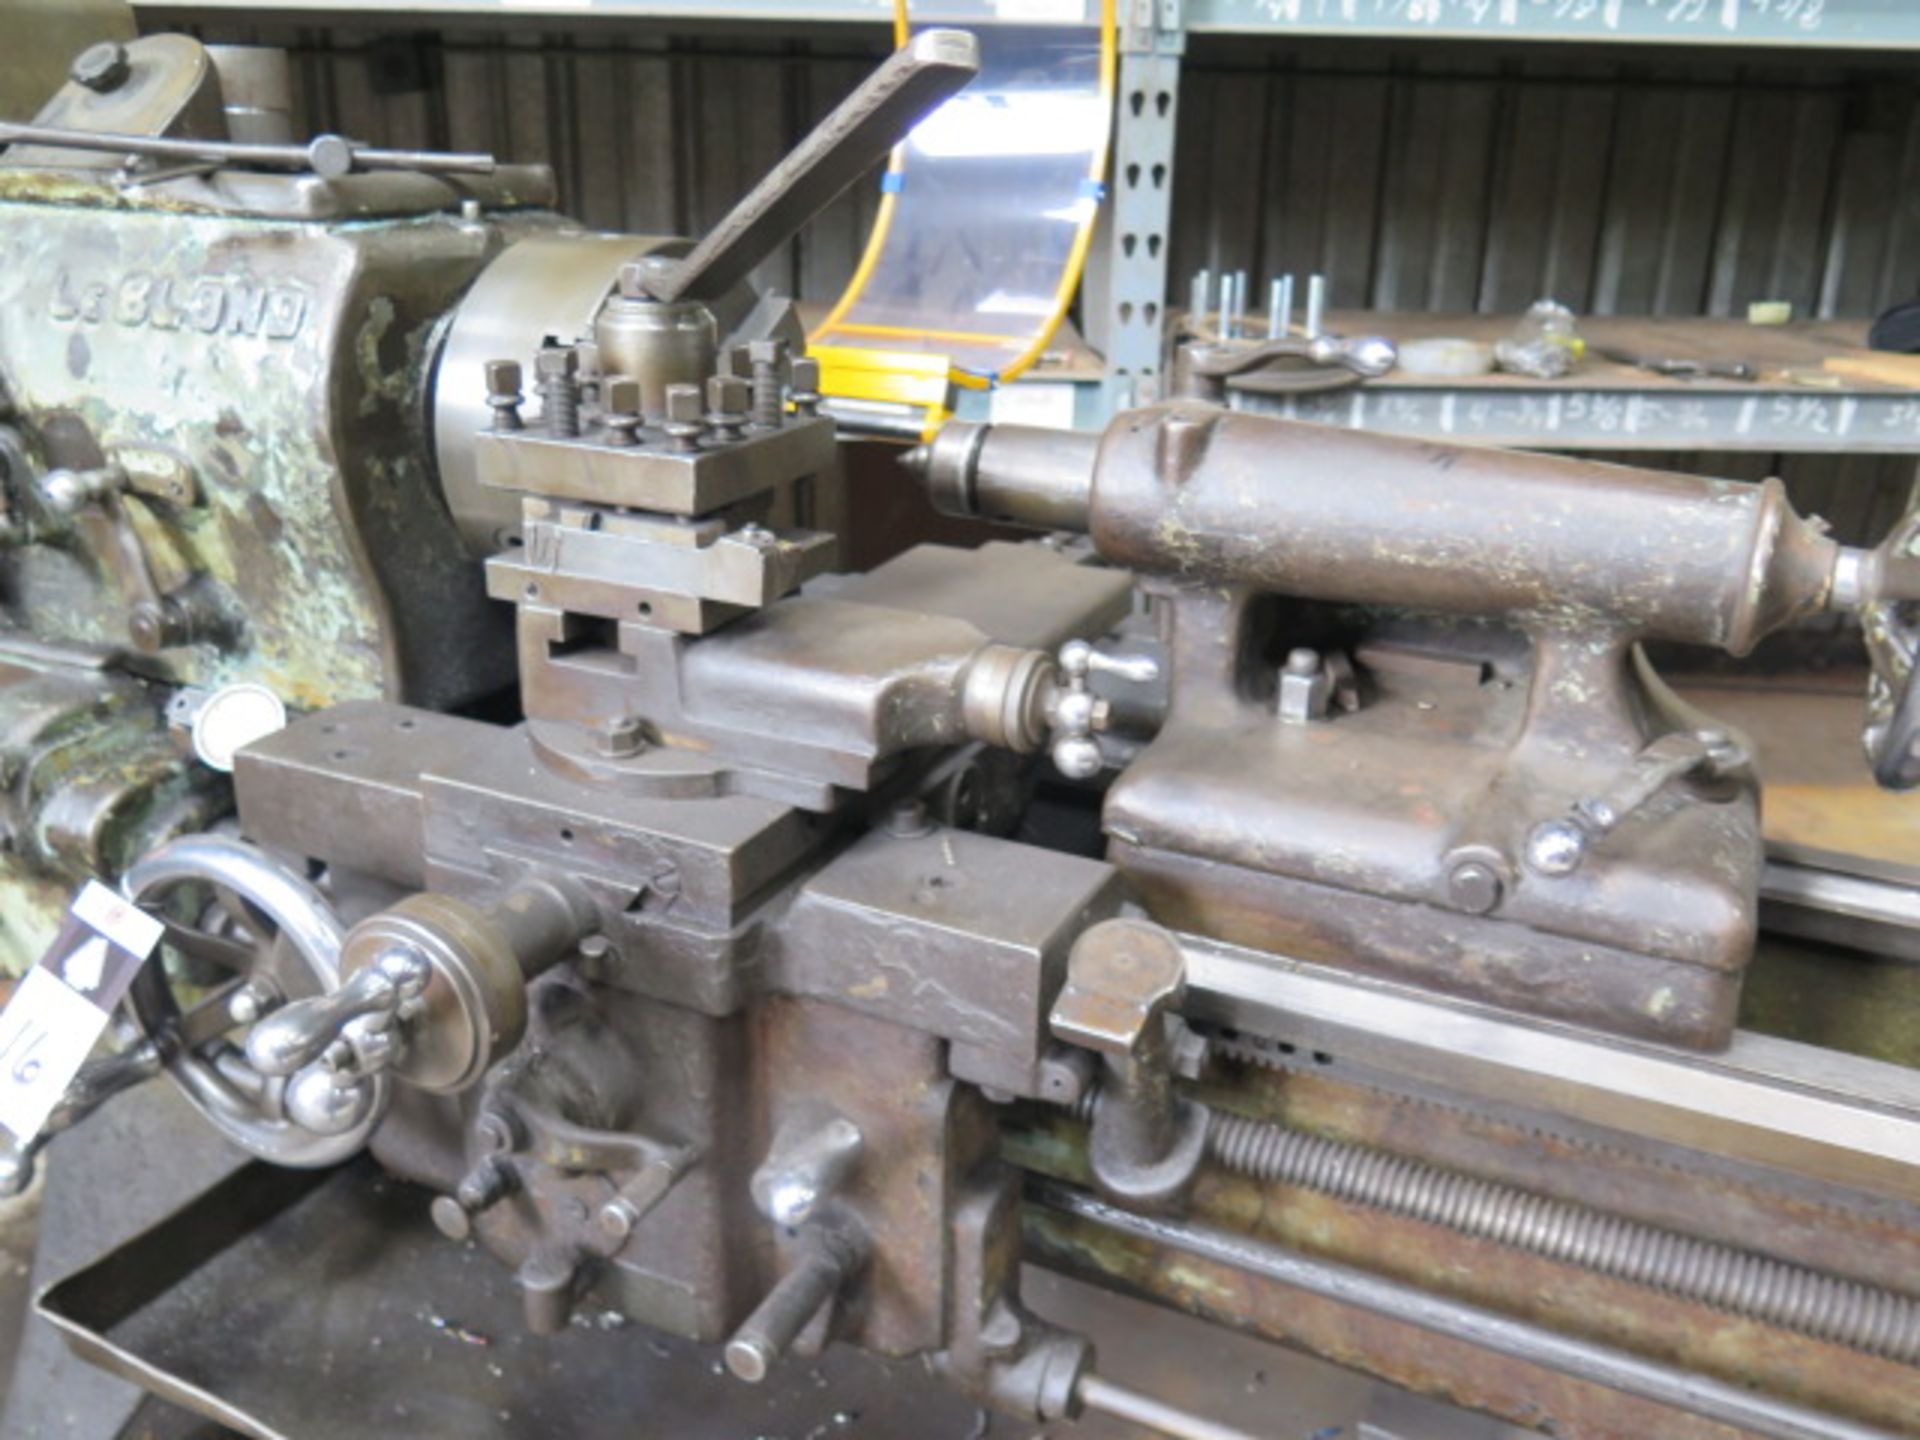 LeBlond 18” x 54” Lathe w/ 10-634 RPM, Inch Threading, Indexing Tool Post, 10” 3-Jaw, SOLD AS IS - Image 5 of 7